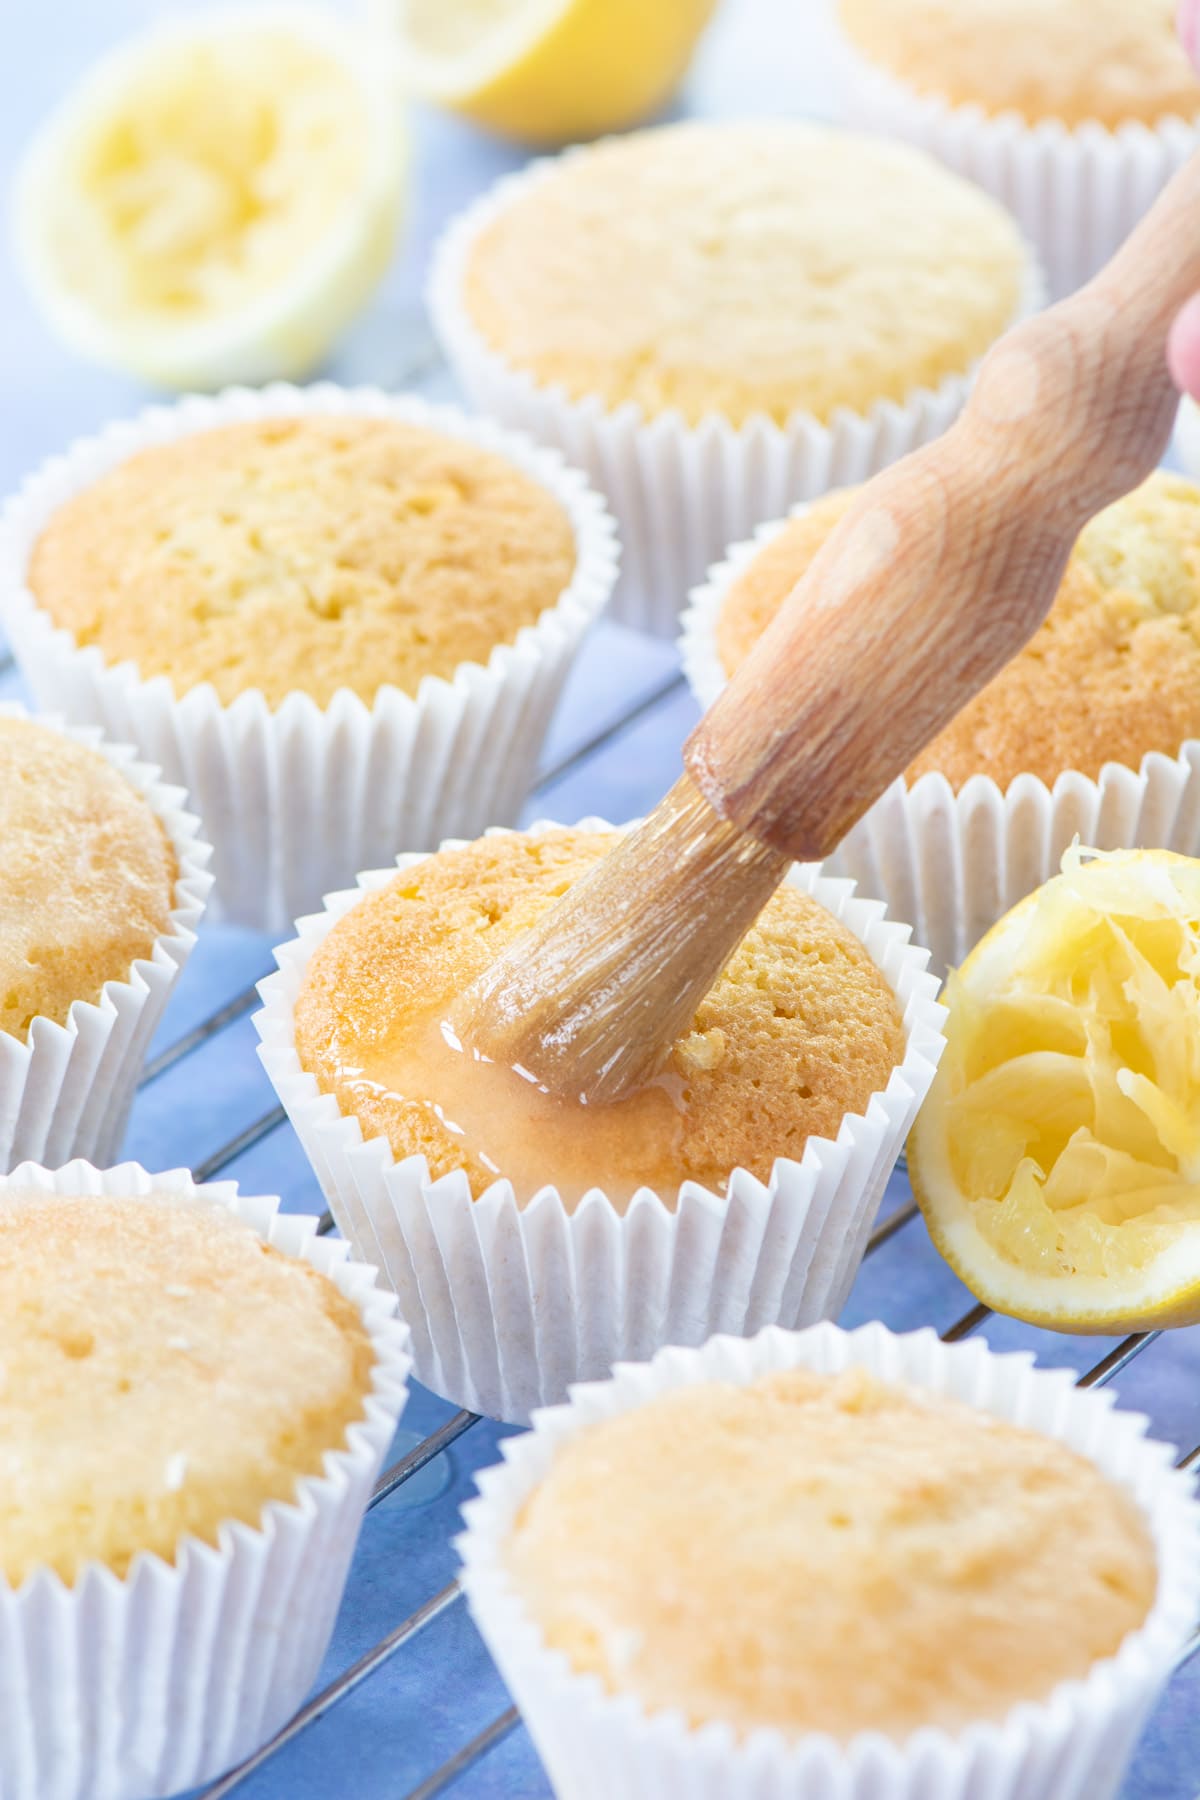 Lemon drizzle cupcakes that are easy to make and absolutely jam-packed with flavour.